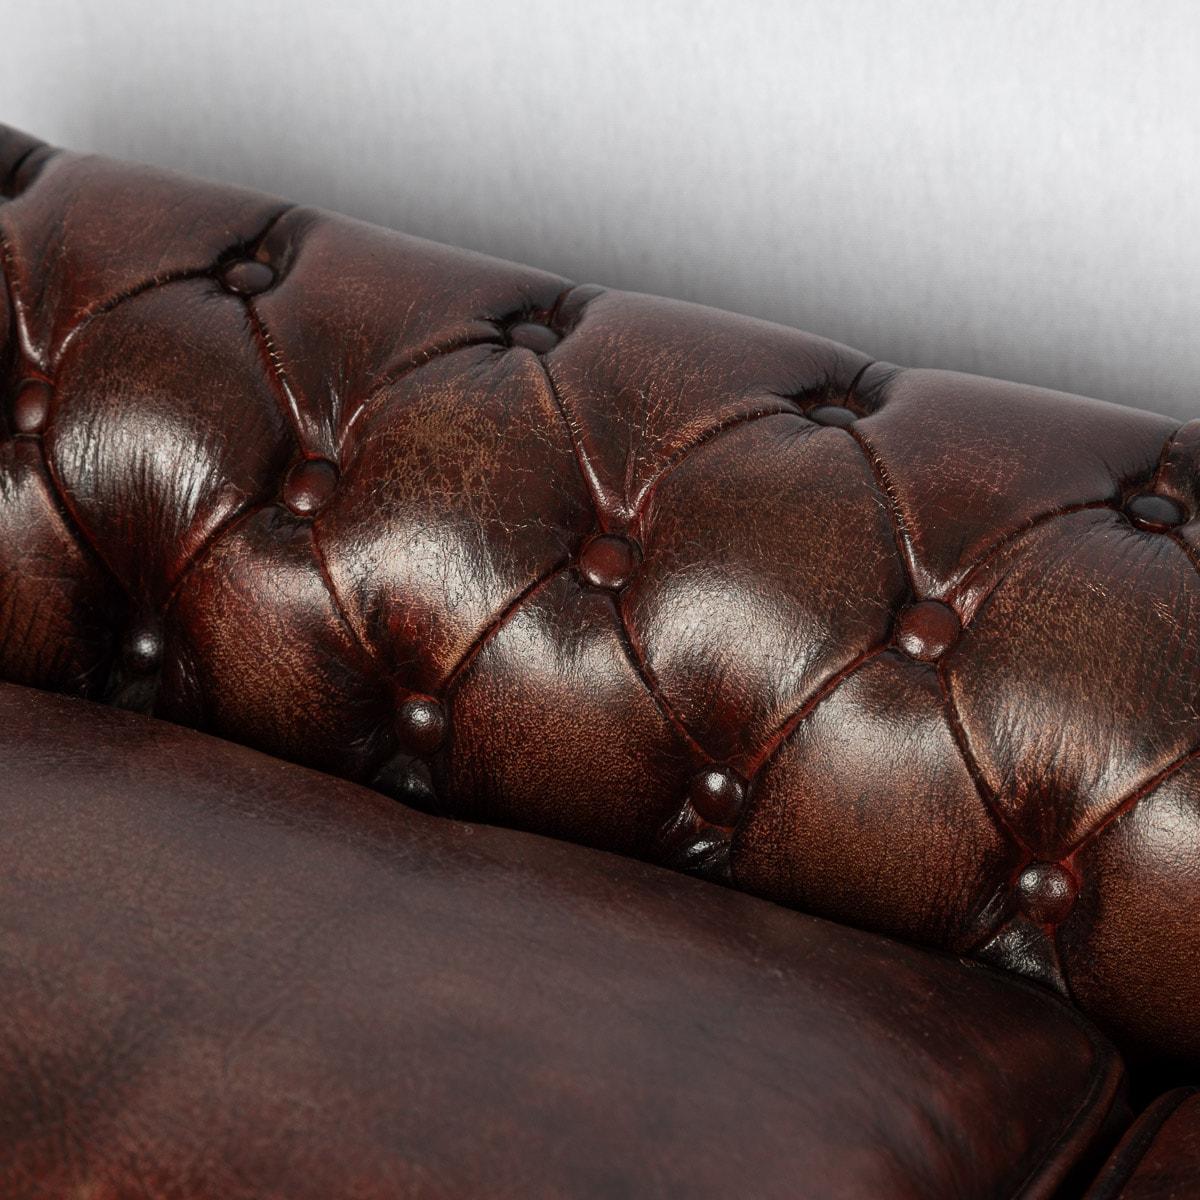 20th Century English Chesterfield Miniature Leather Sofa With Cushion Seats For Sale 11